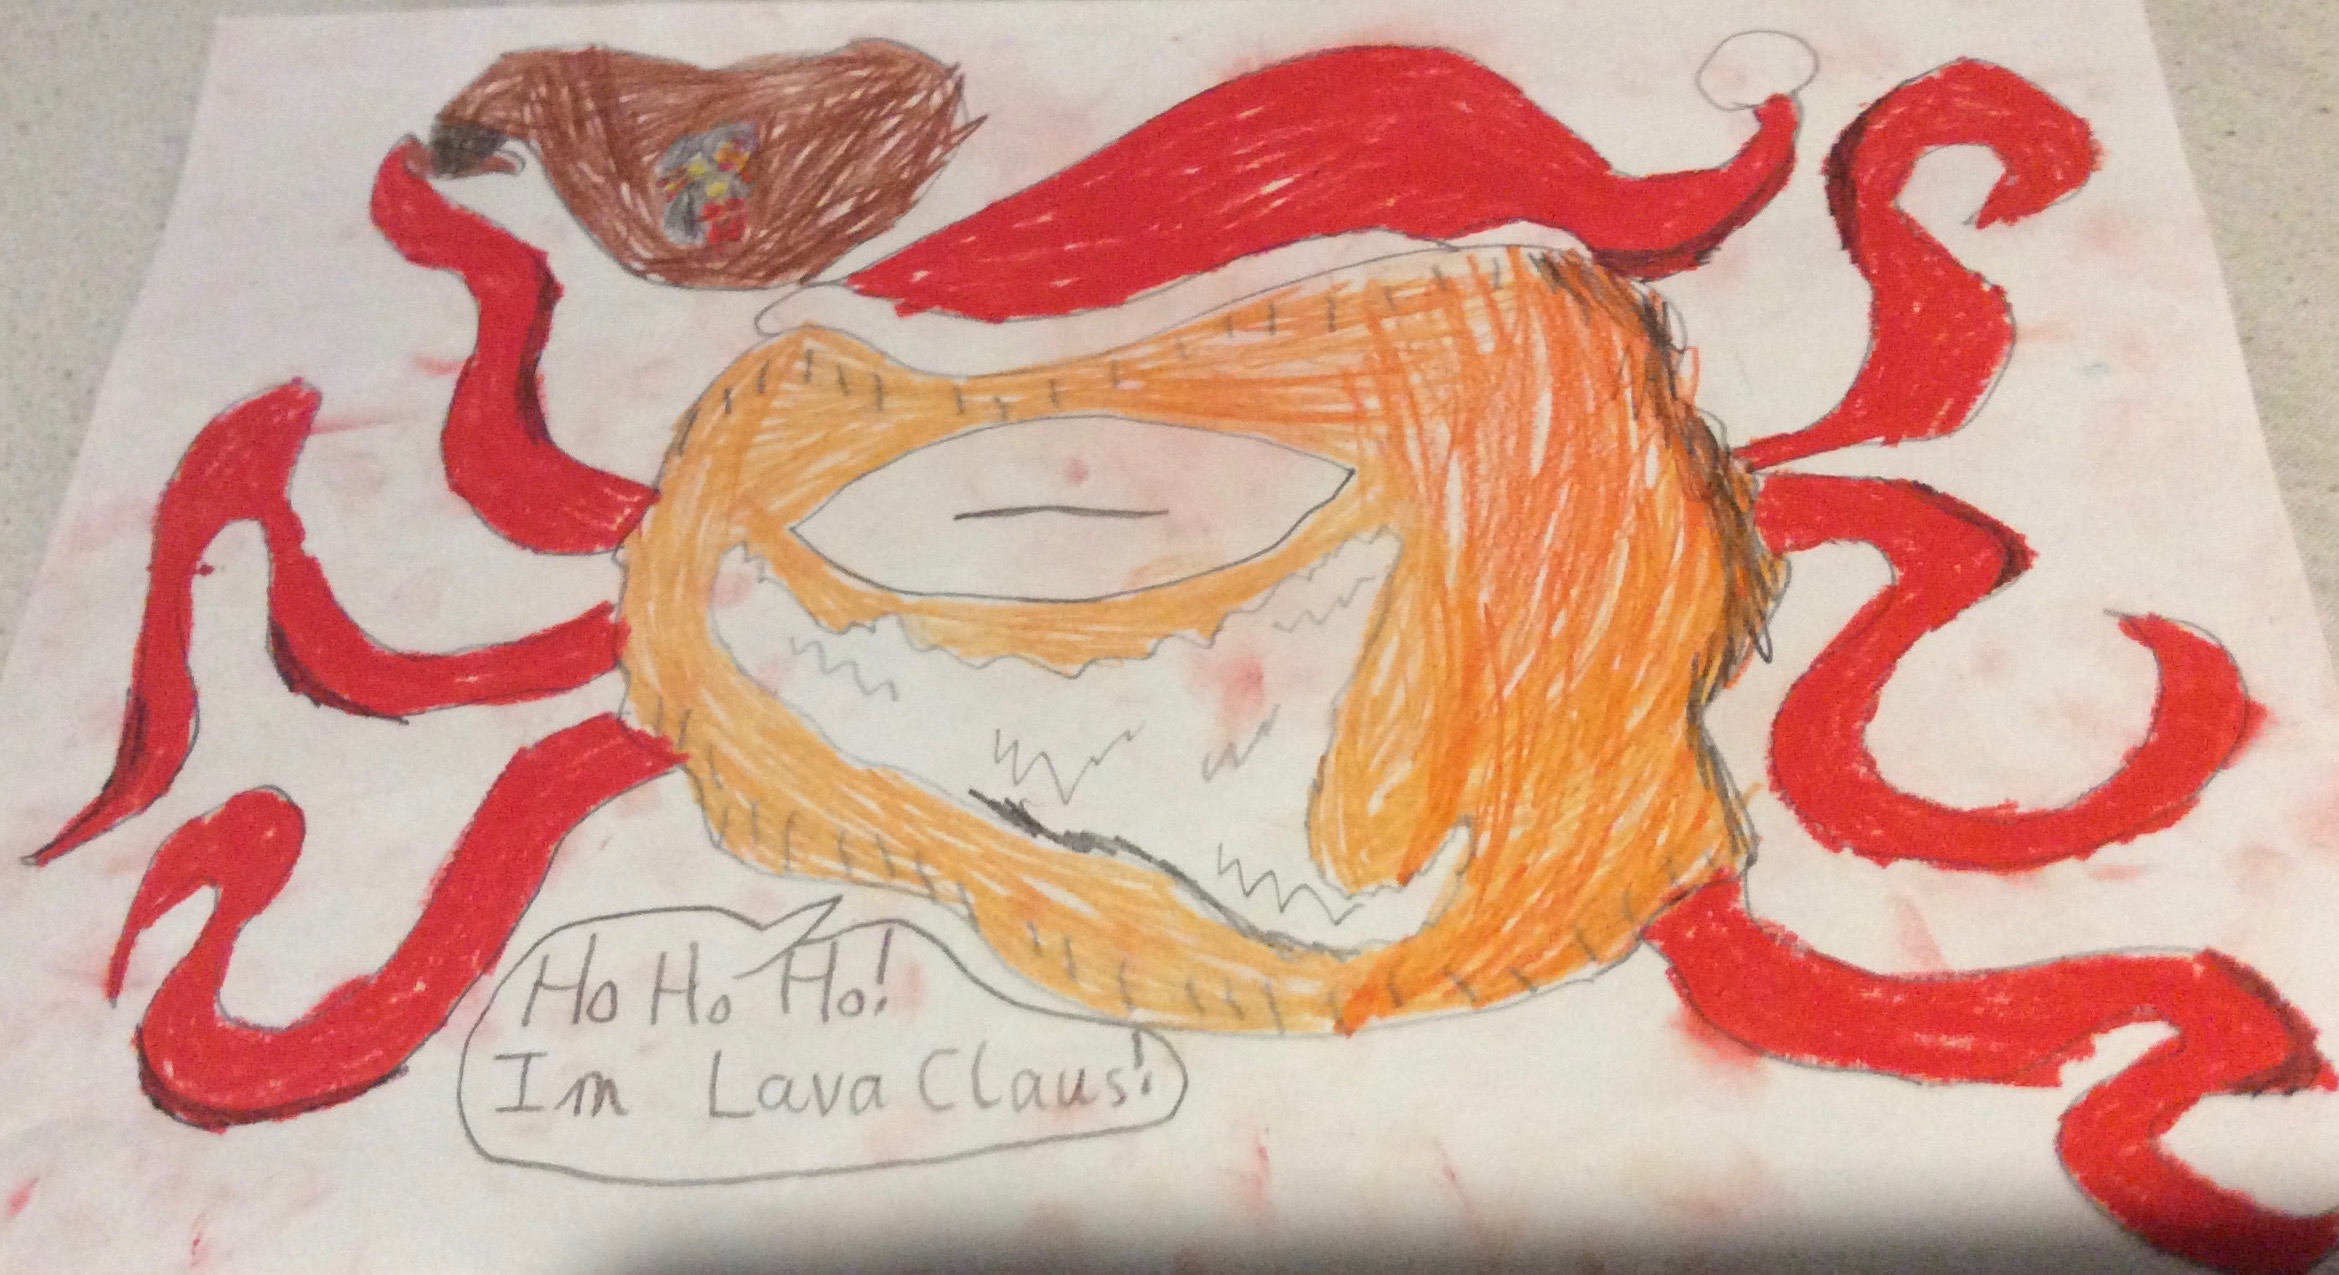 'Lava eye’s Christmas' by Art (8) from Galway